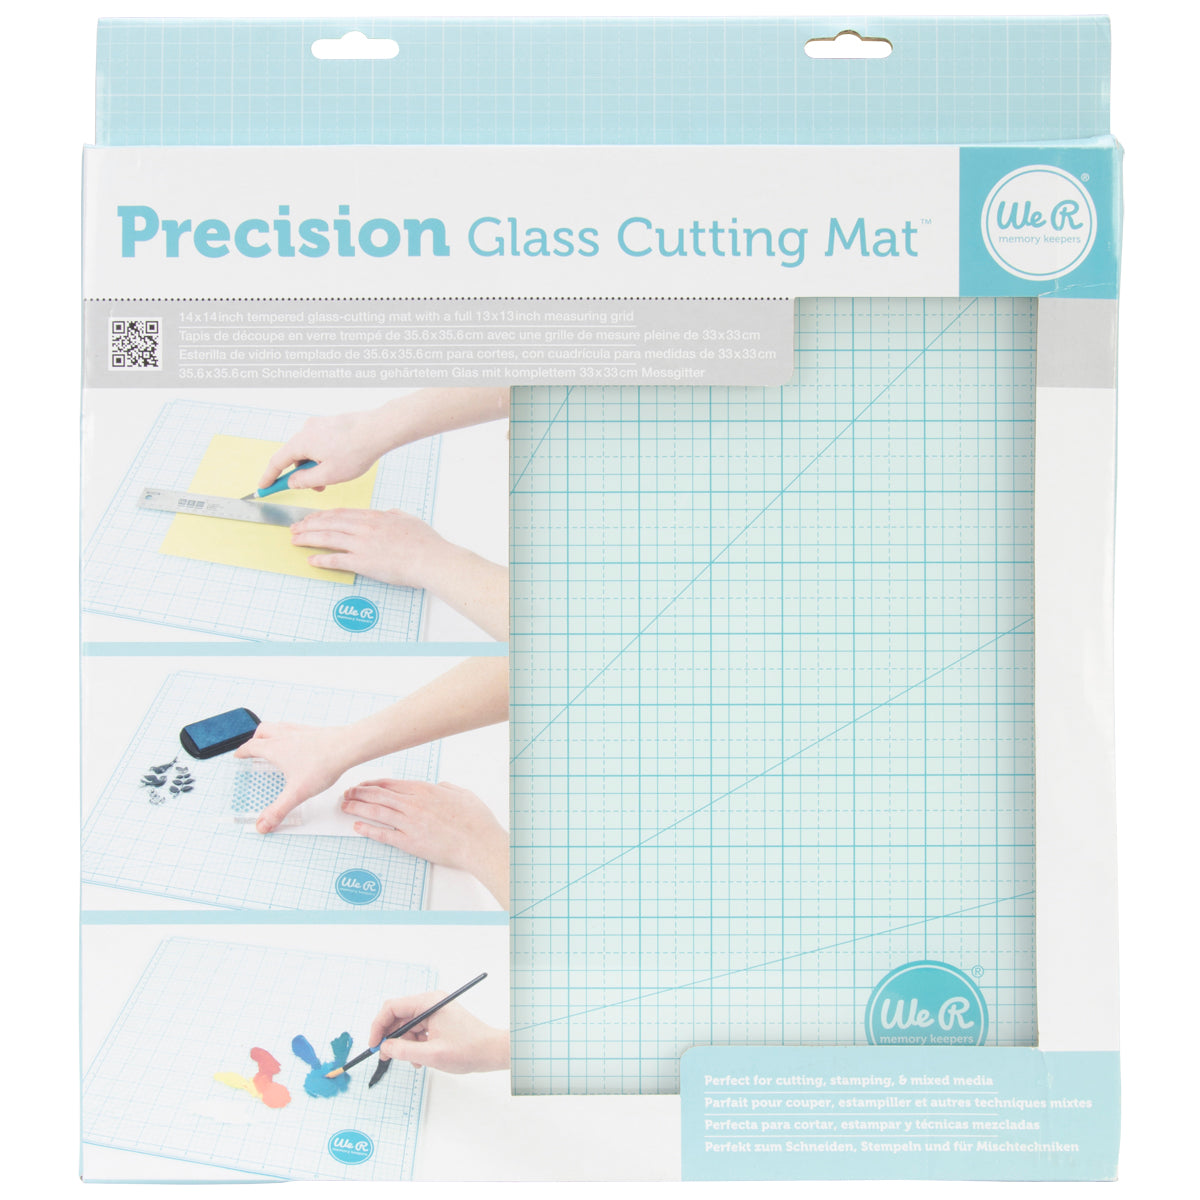 CraftEmotions Glass Craft Mat (60,3 x 36,2cm) magnetic Tempered glass grid  40x32cm